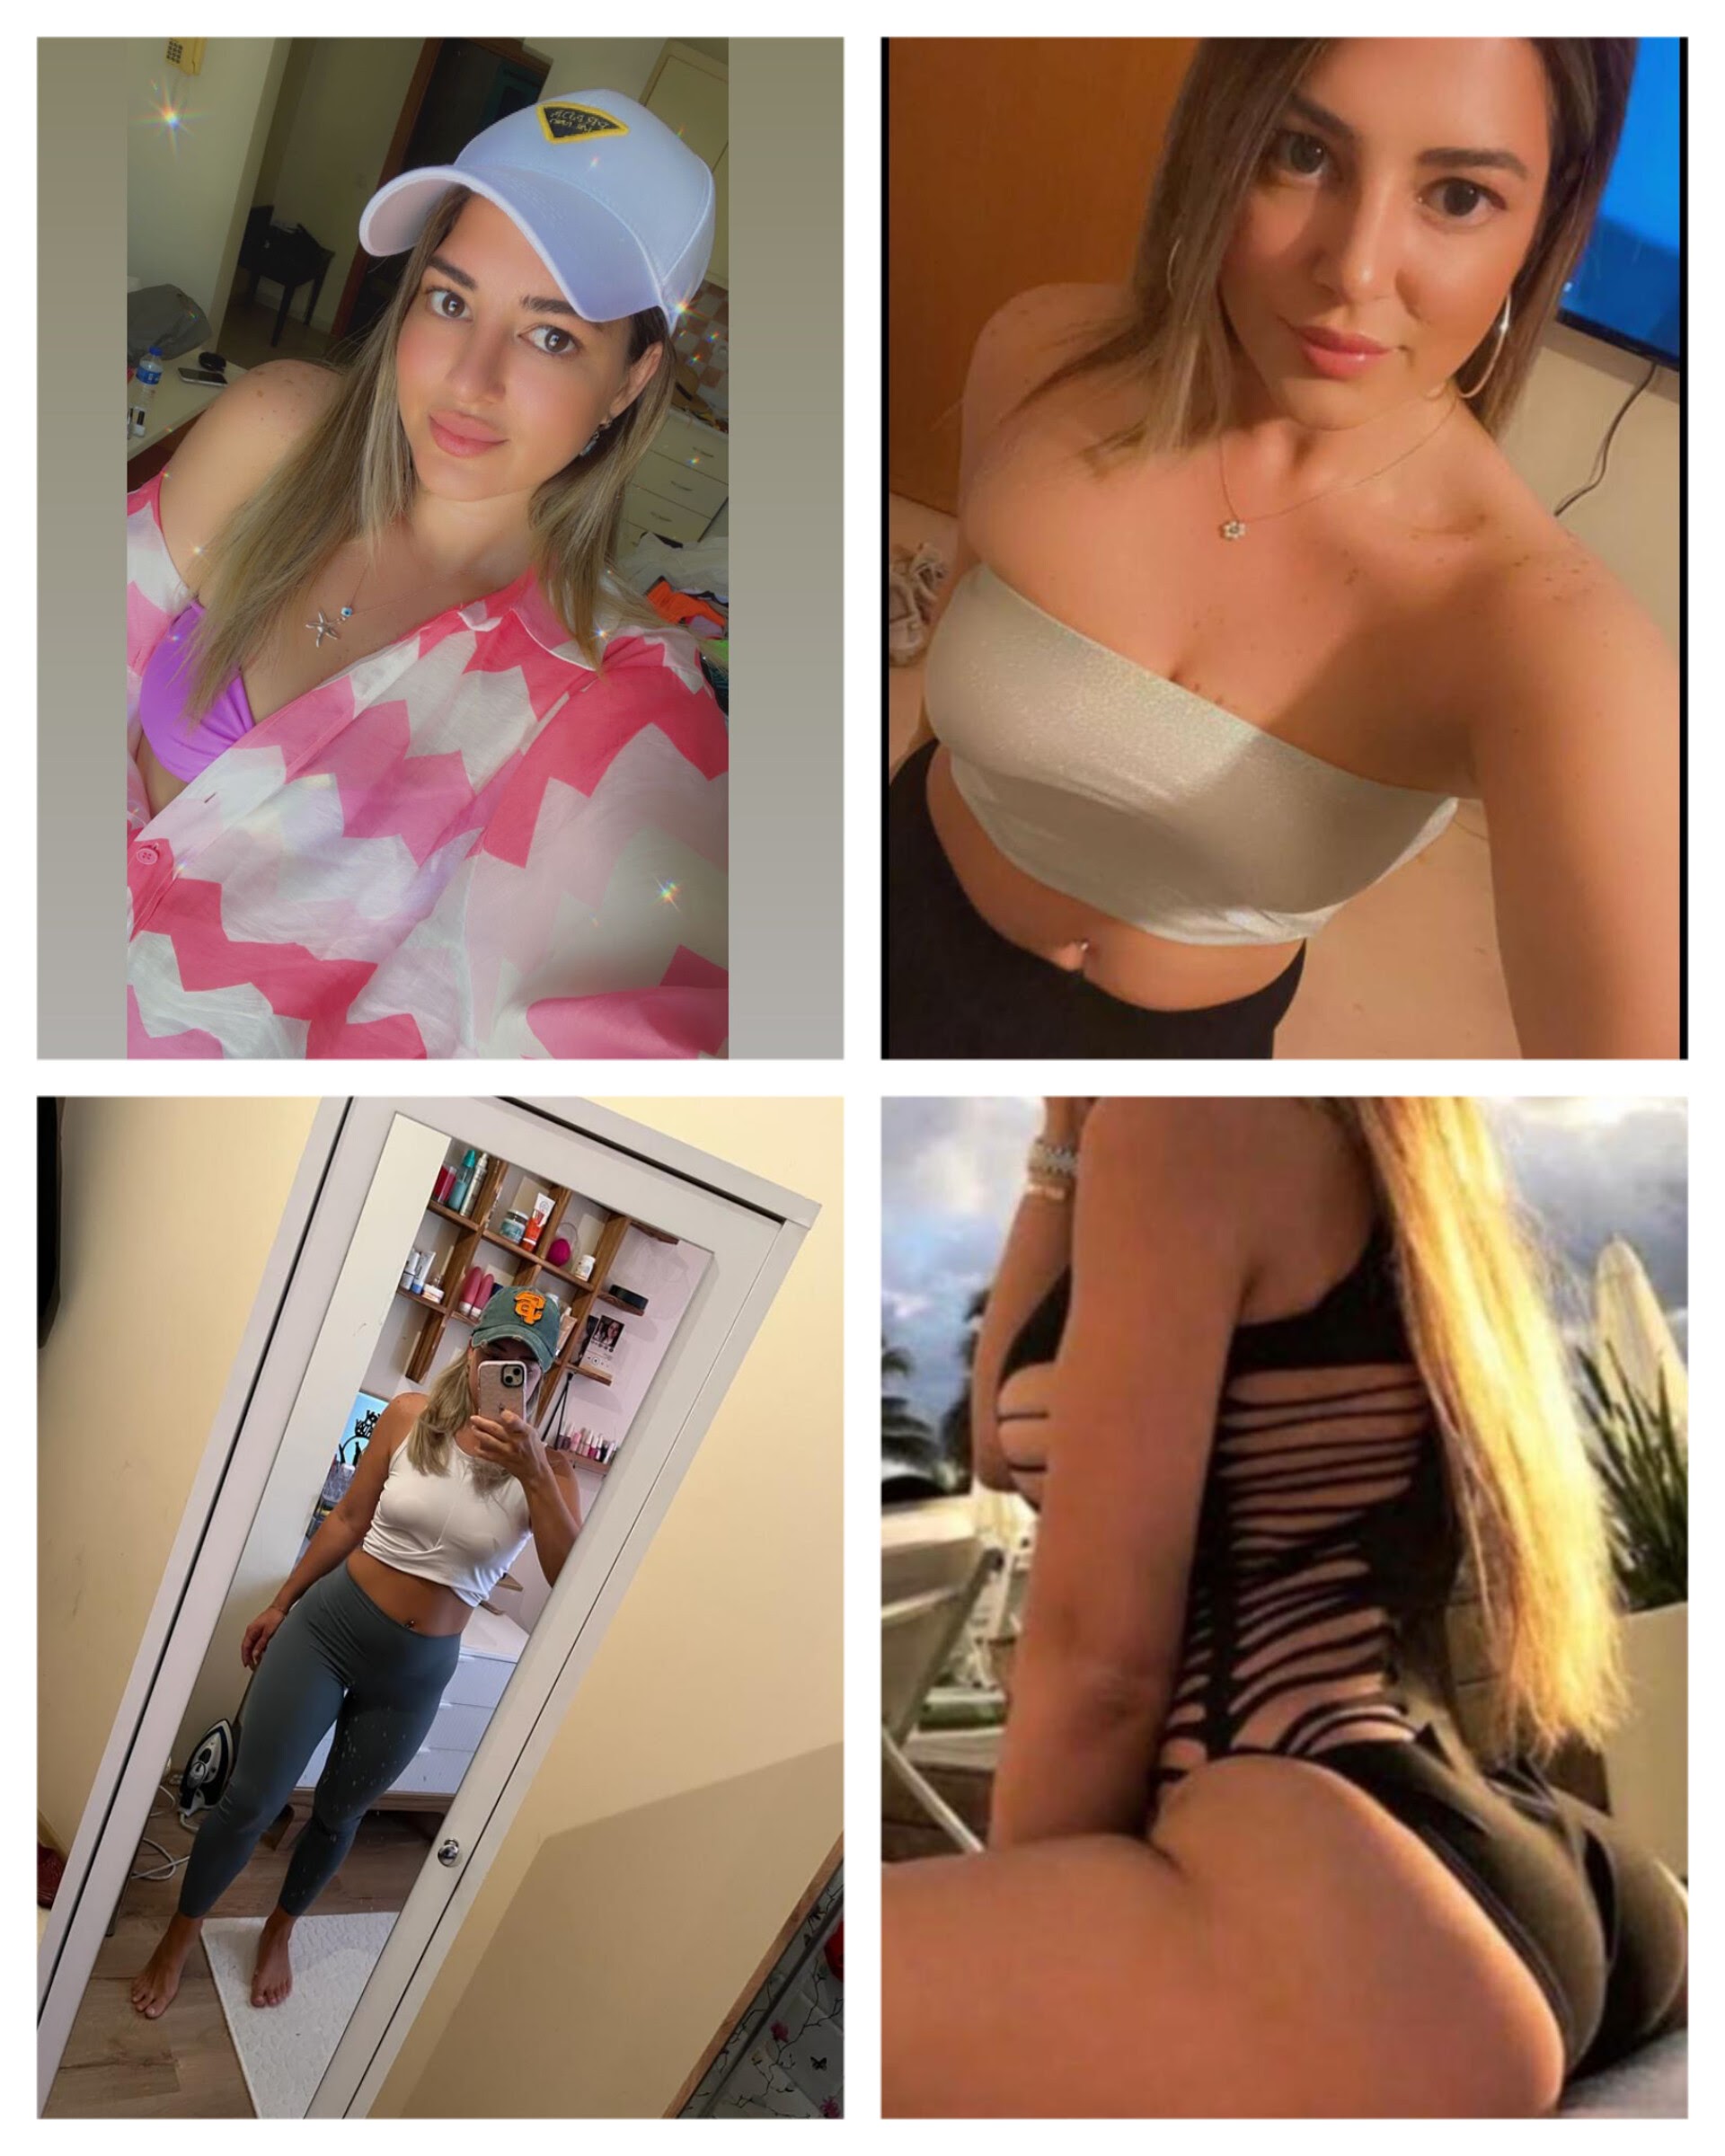 JessicaLove 23 Tall,Blonde,Spanish,Red,Russian